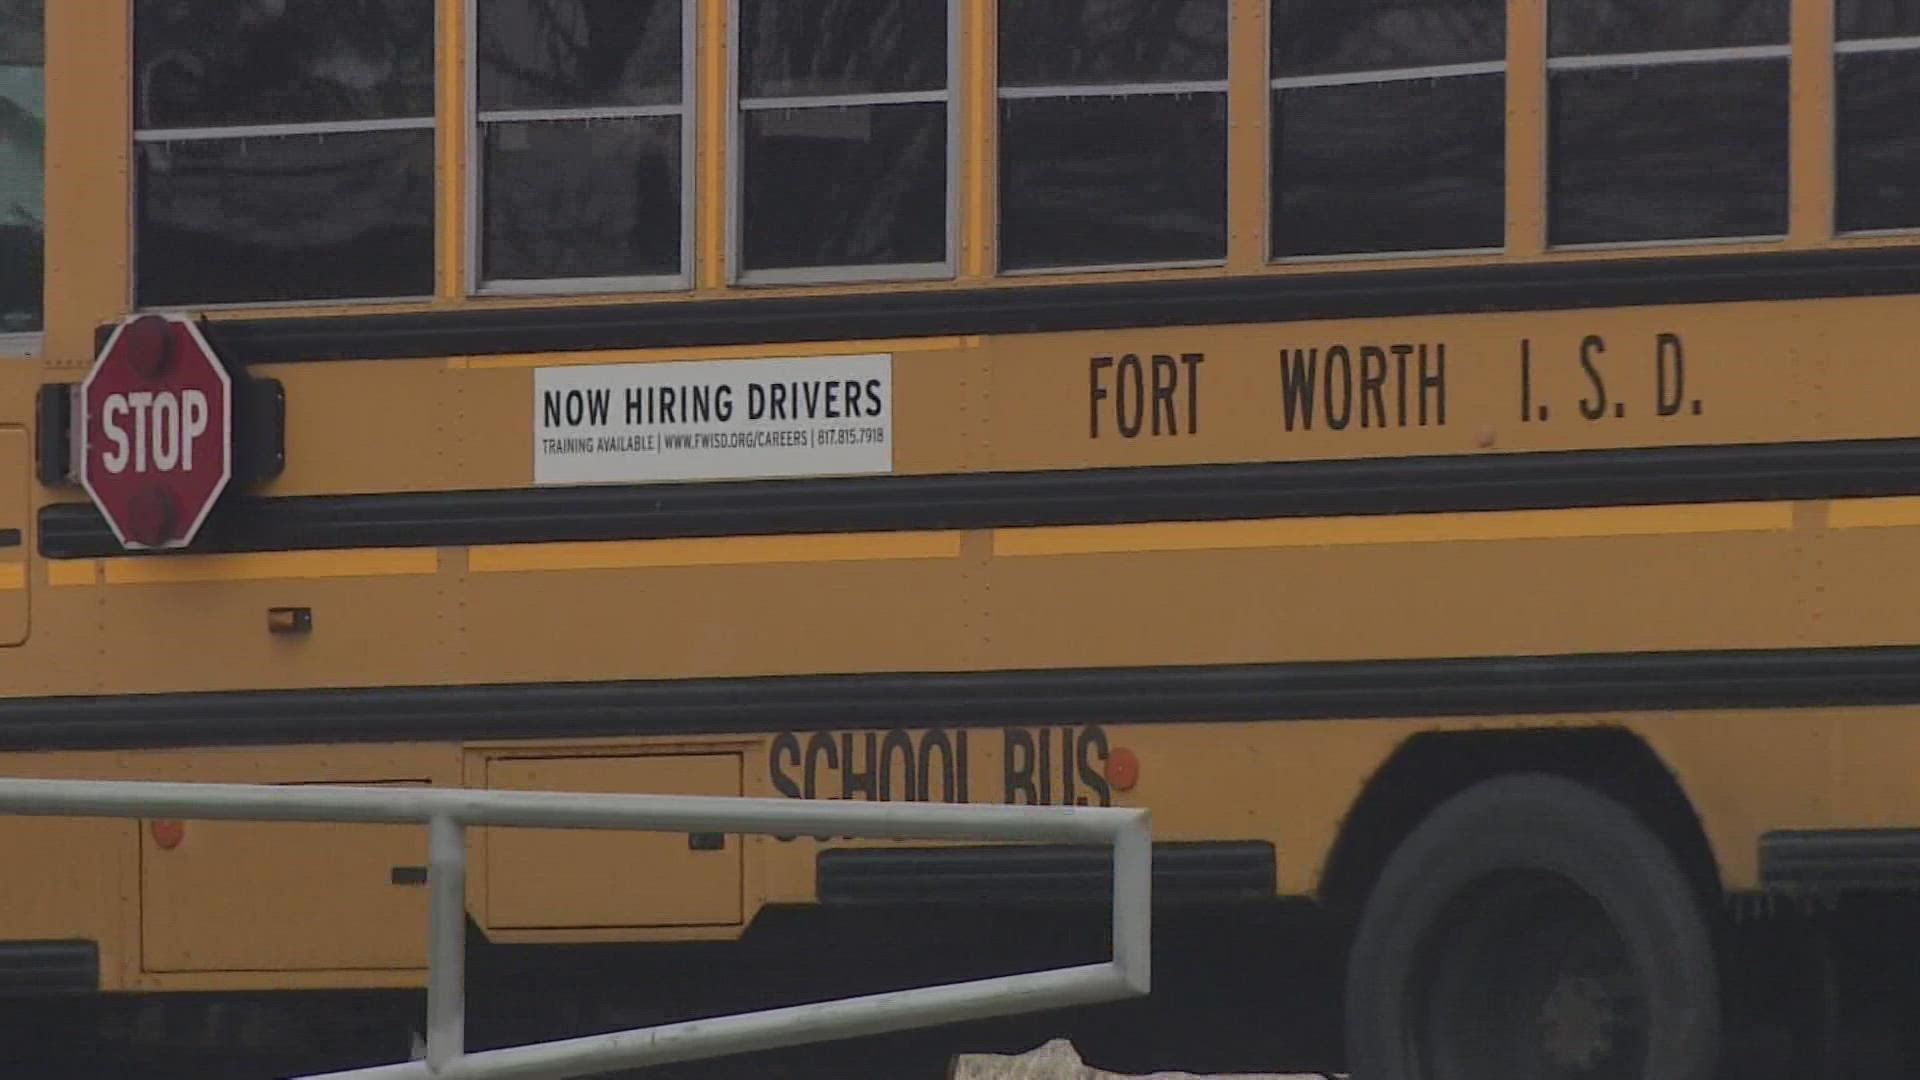 Fort Worth ISD canceled classes on Thursday but said they will resume a regular schedule on Friday.